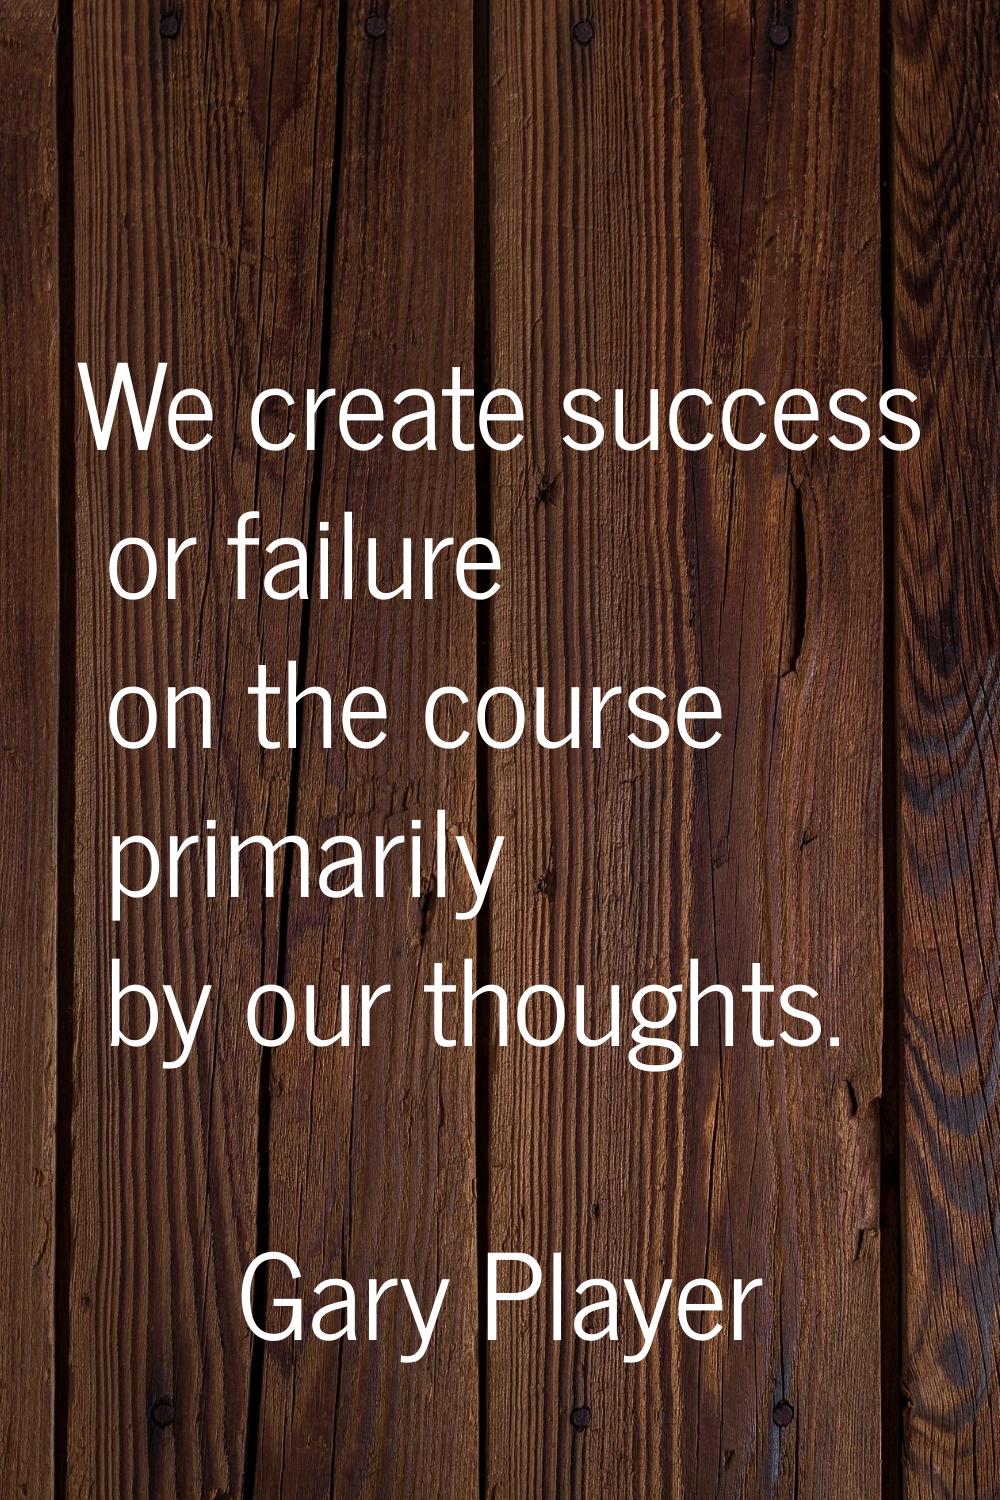 We create success or failure on the course primarily by our thoughts.